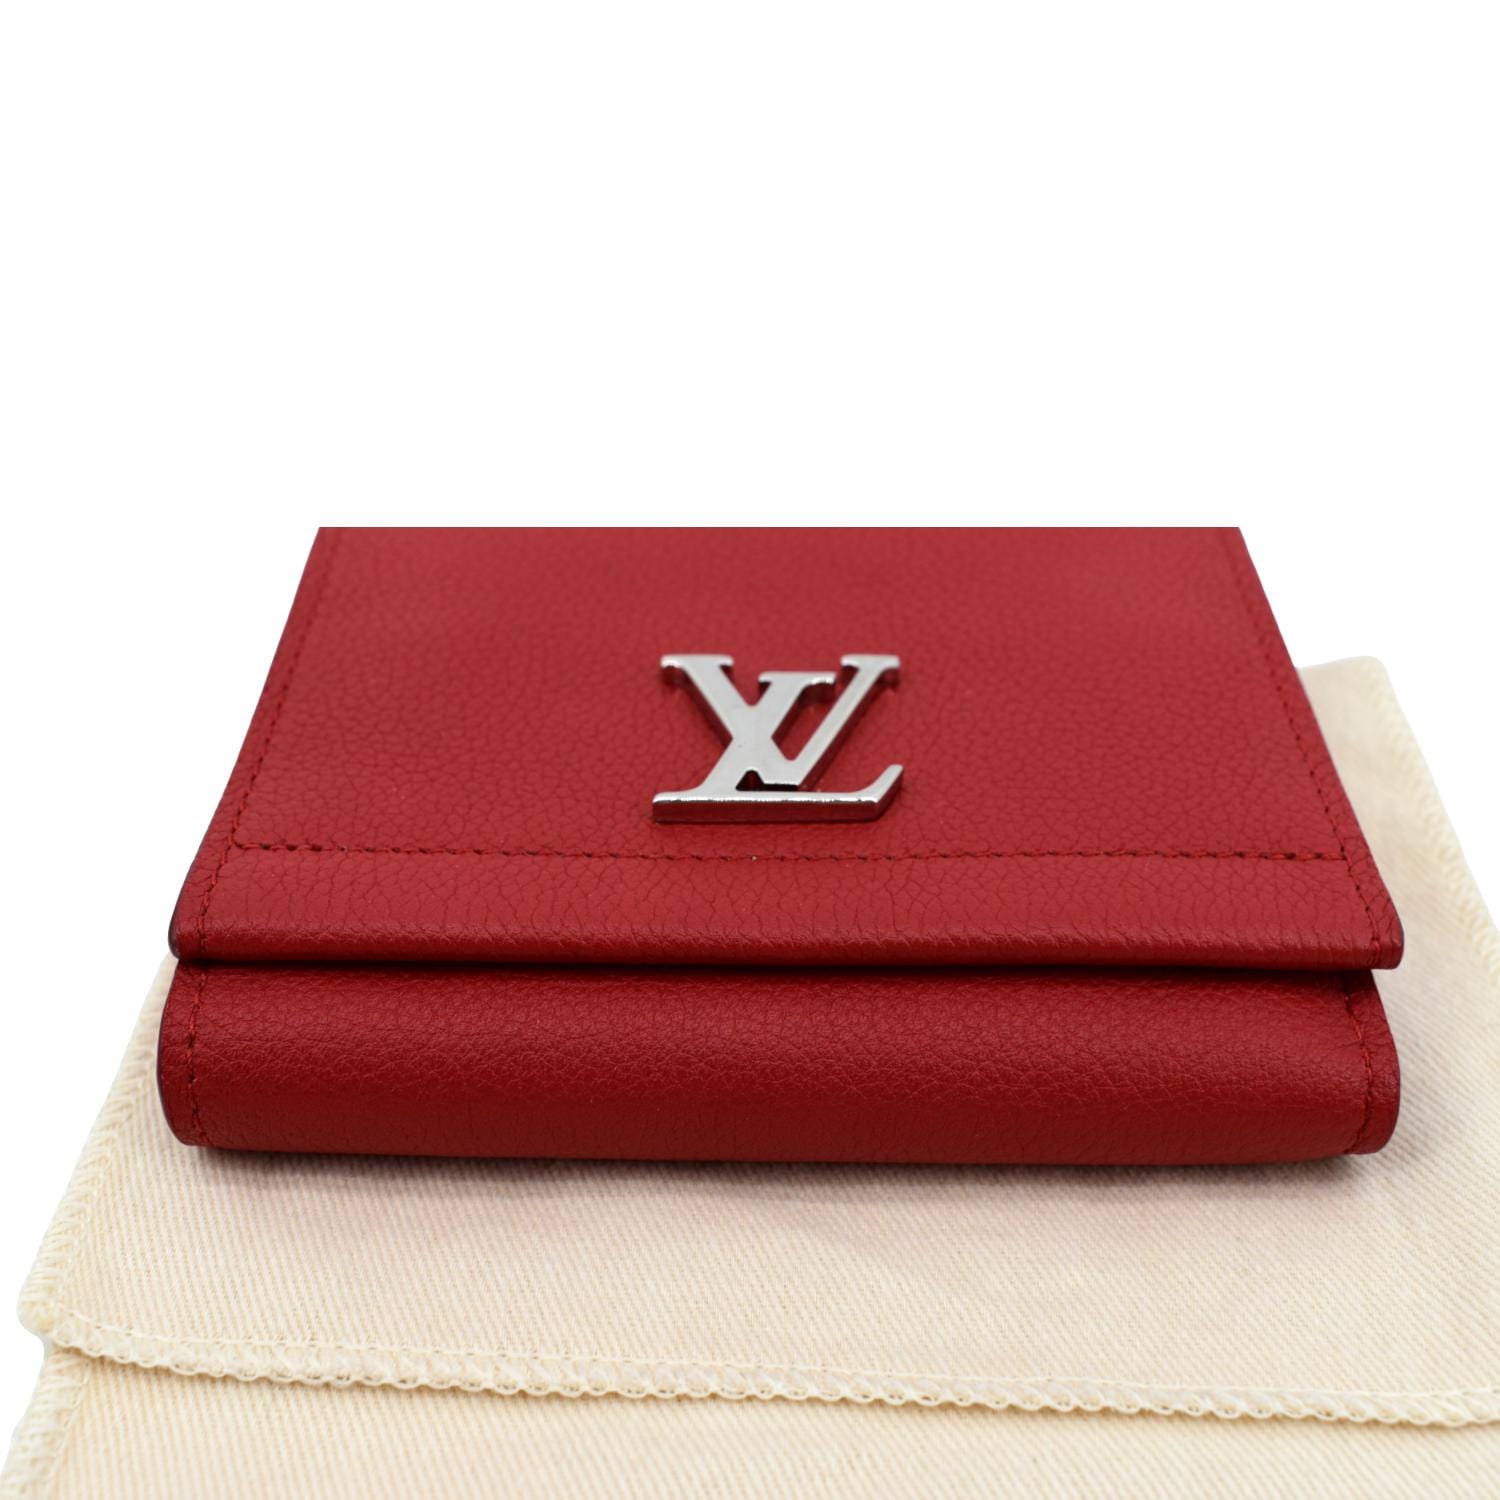 Small Wallets For Women - LOUIS VUITTON